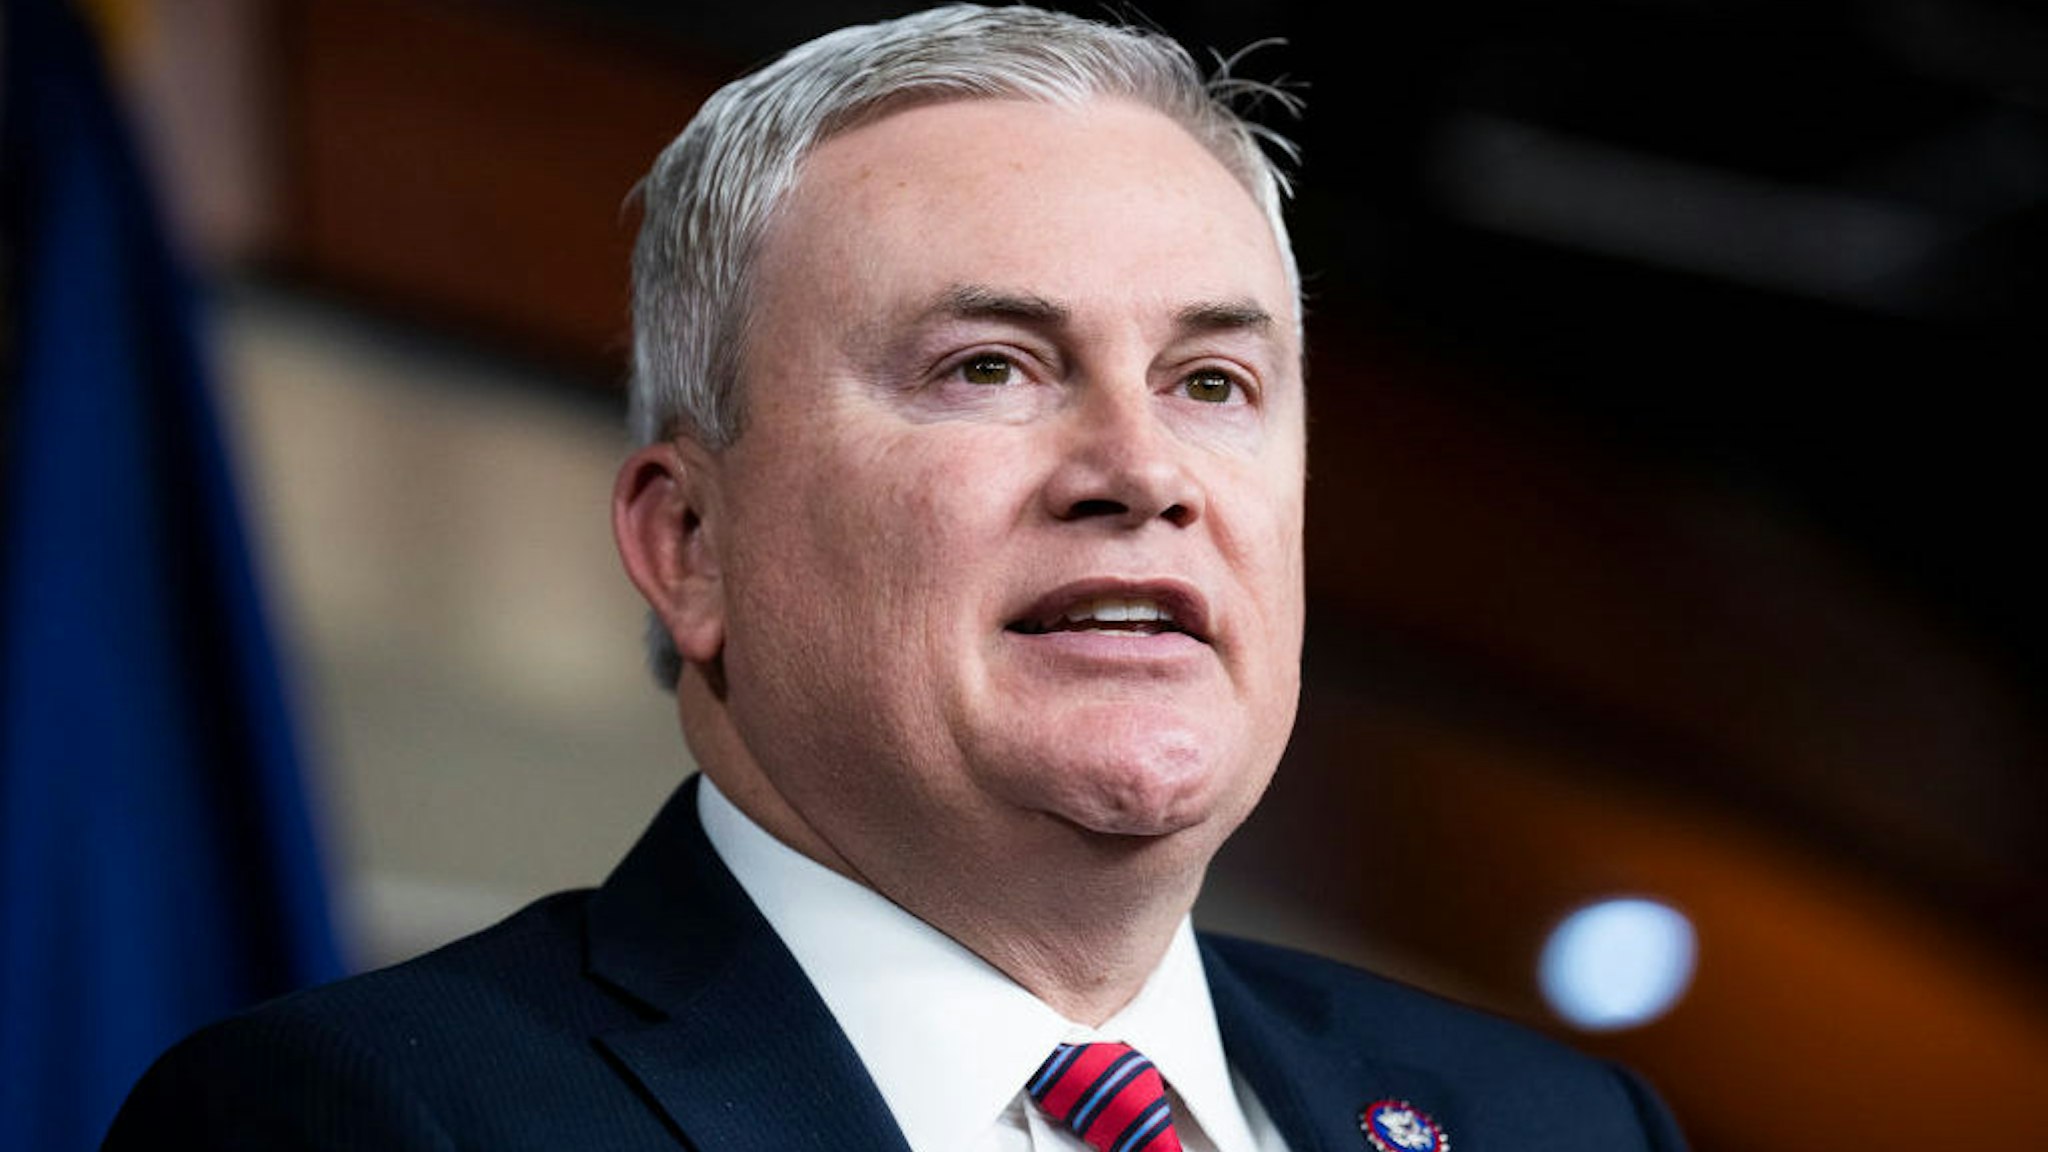 UNITED STATES - JANUARY 19: Rep. James Comer, R-Ky., speaks during a news conference with members of the GOP Doctors Caucus after a meeting of the House Republican Conference in the U.S. Capitol on Wednesday, January 19, 2022. (Photo By Tom Williams/CQ Roll Call)